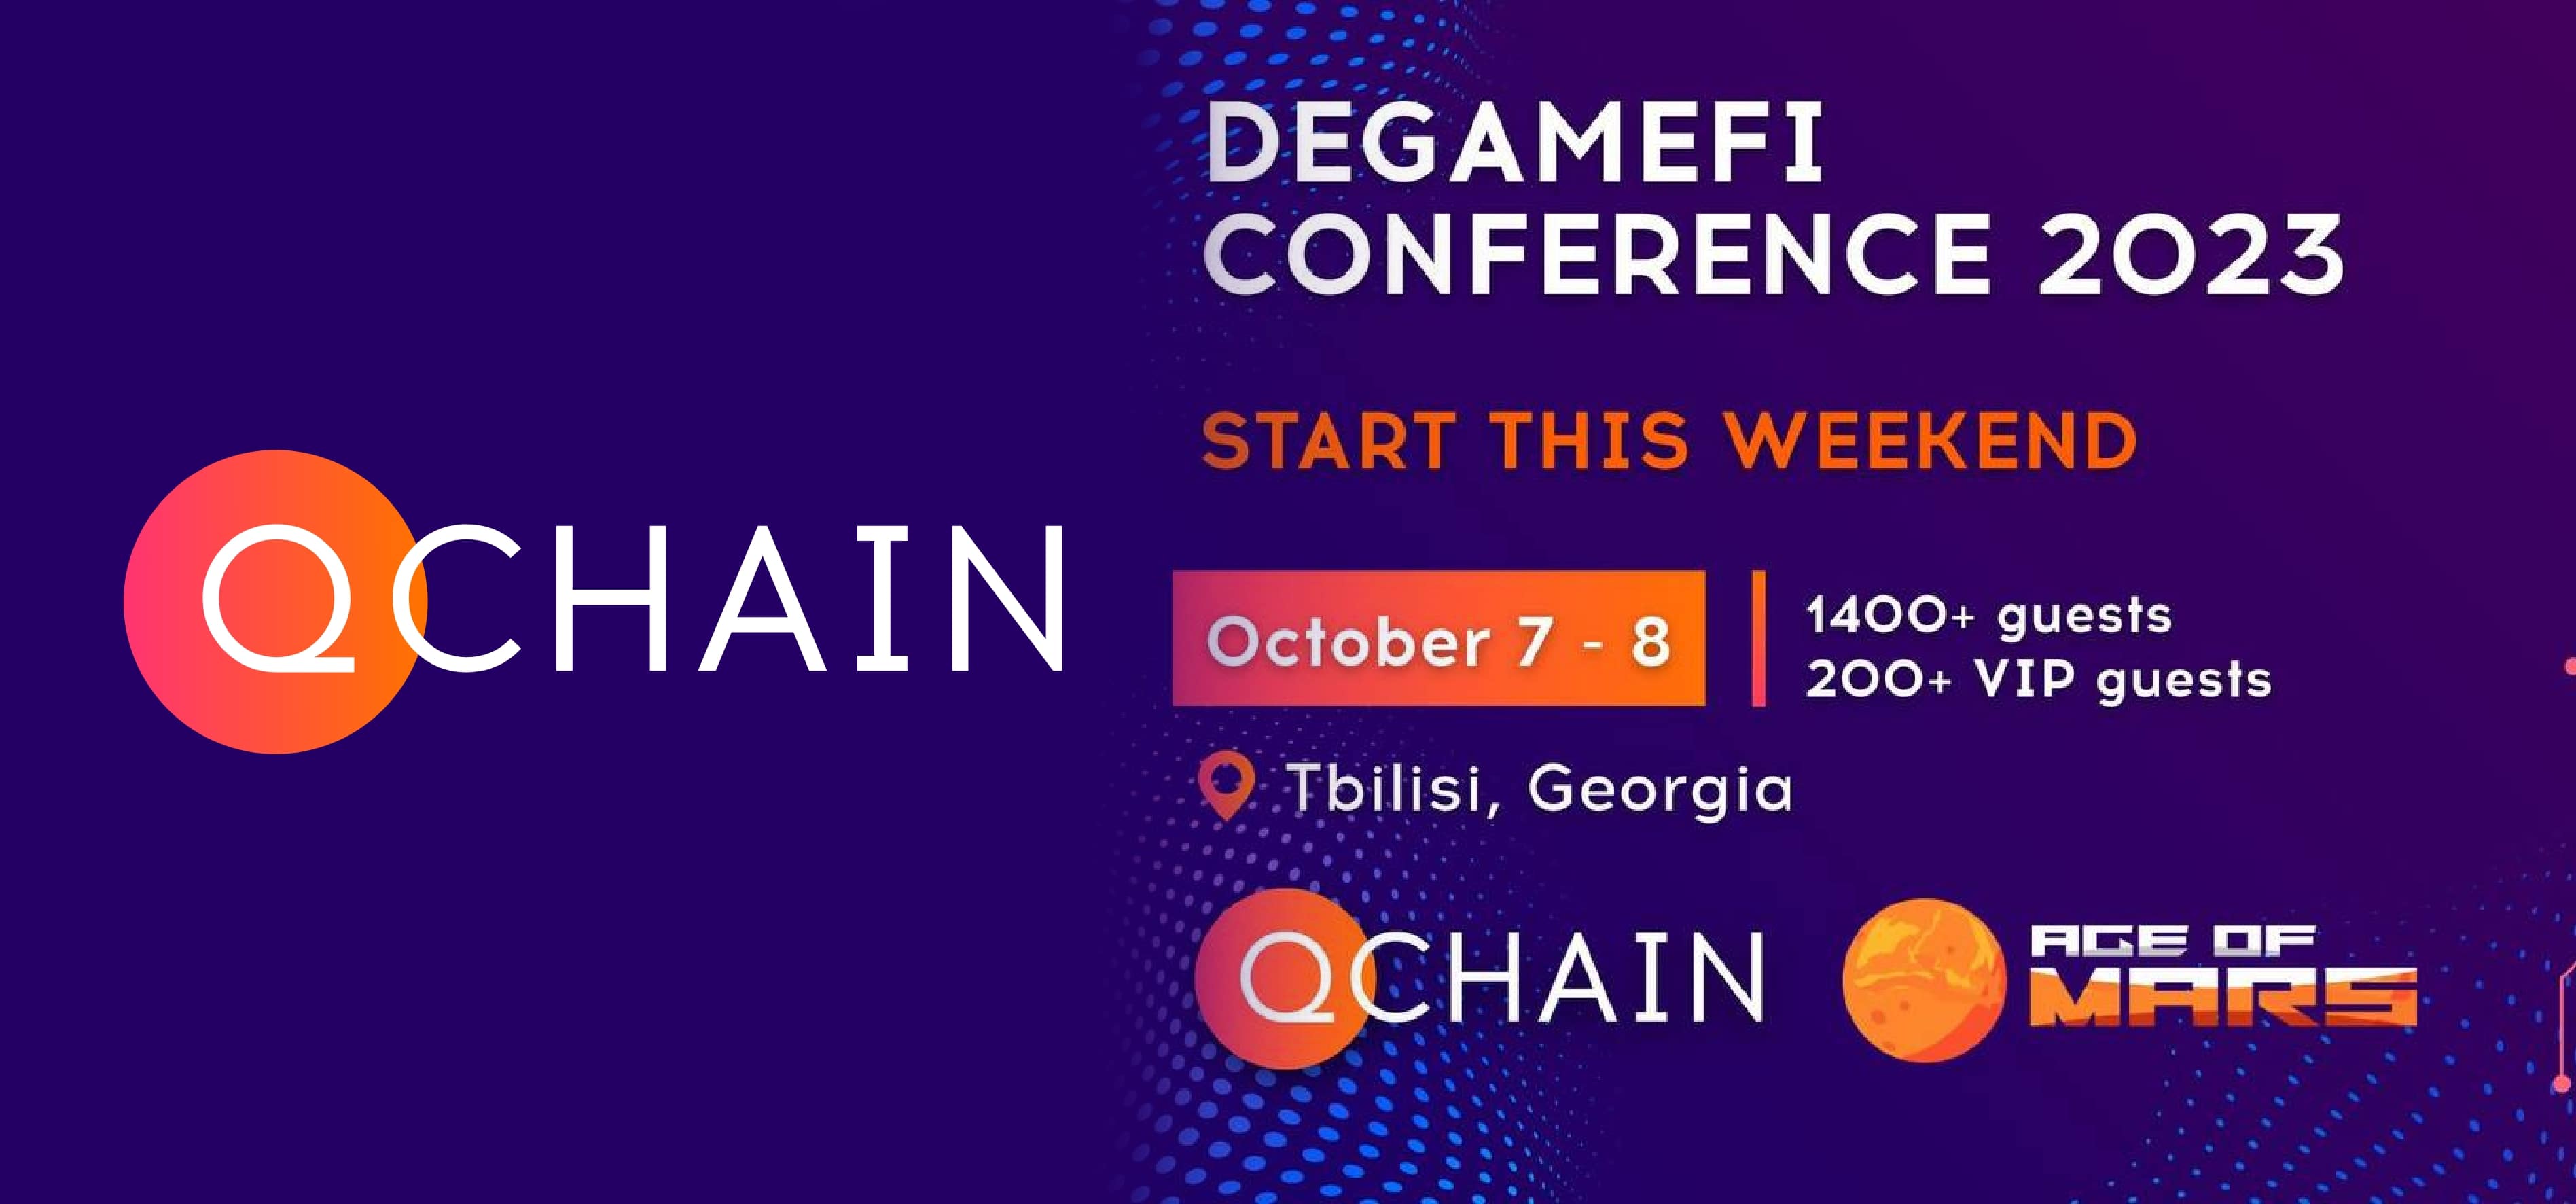 DeGameFi Conference 2023 starts this weekend